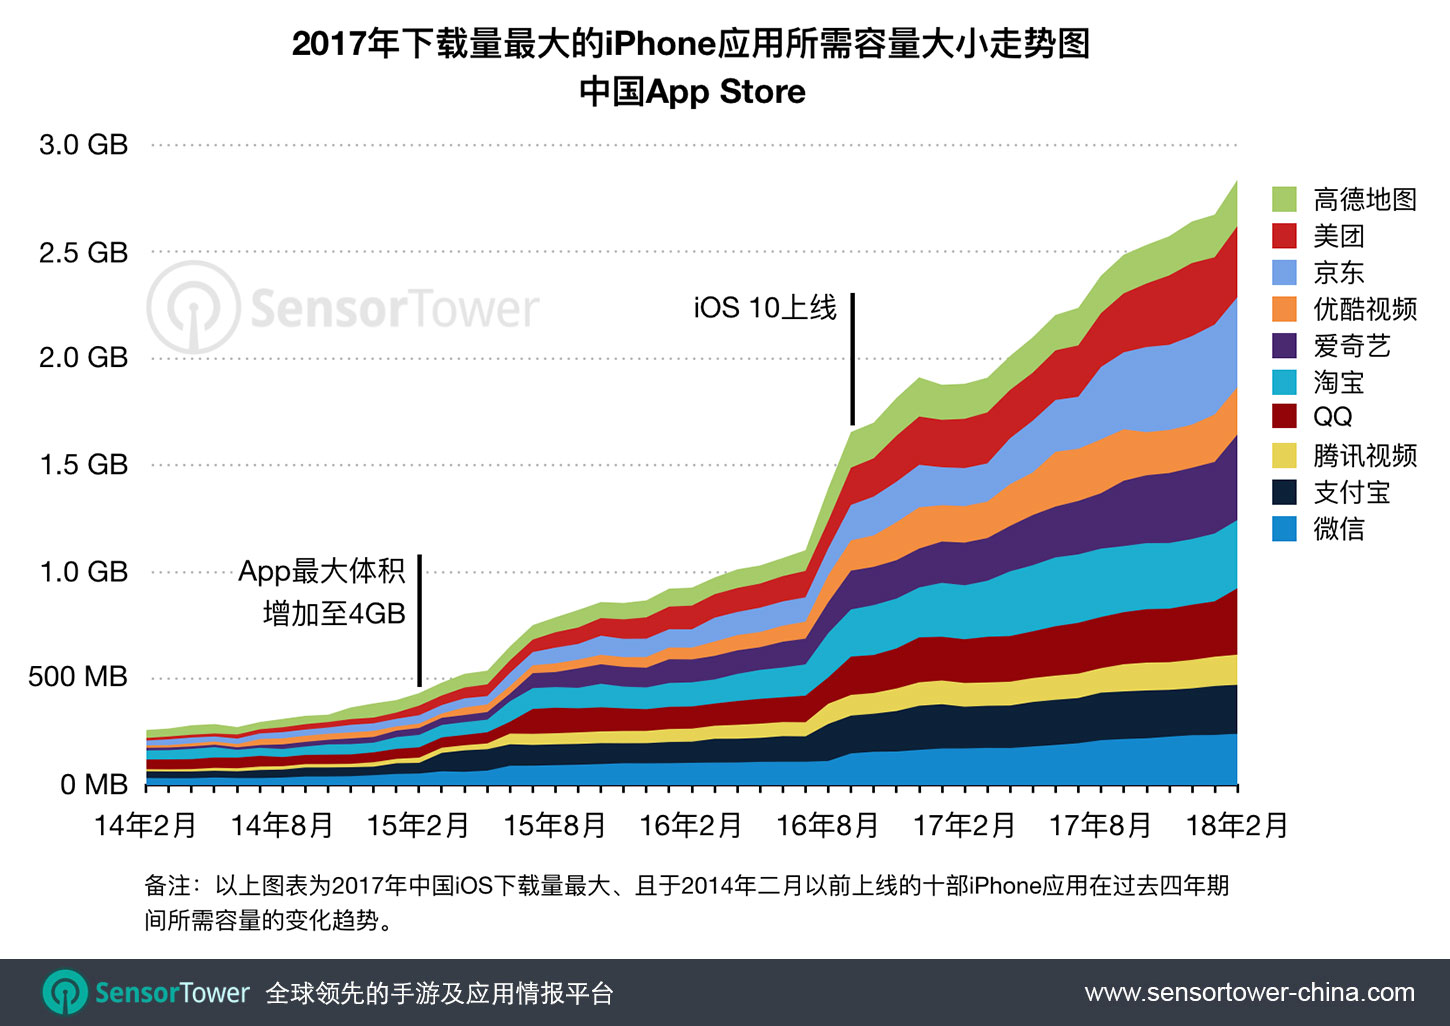 Chinese Top iPhone Apps Size Growth Four Year Trend